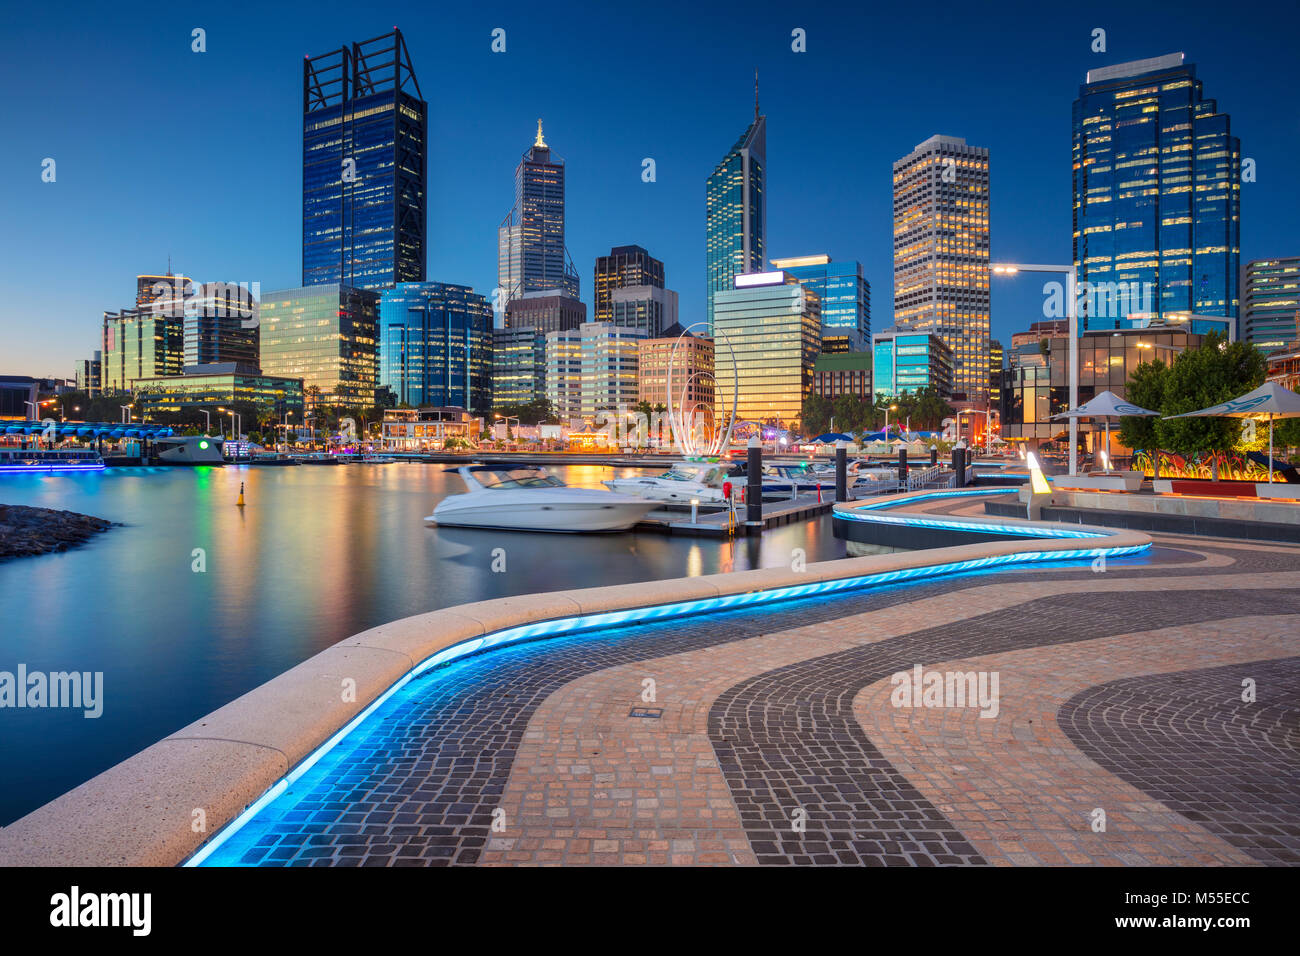 Perth. Cityscape image of Perth downtown skyline, Australia during sunset. Stock Photo